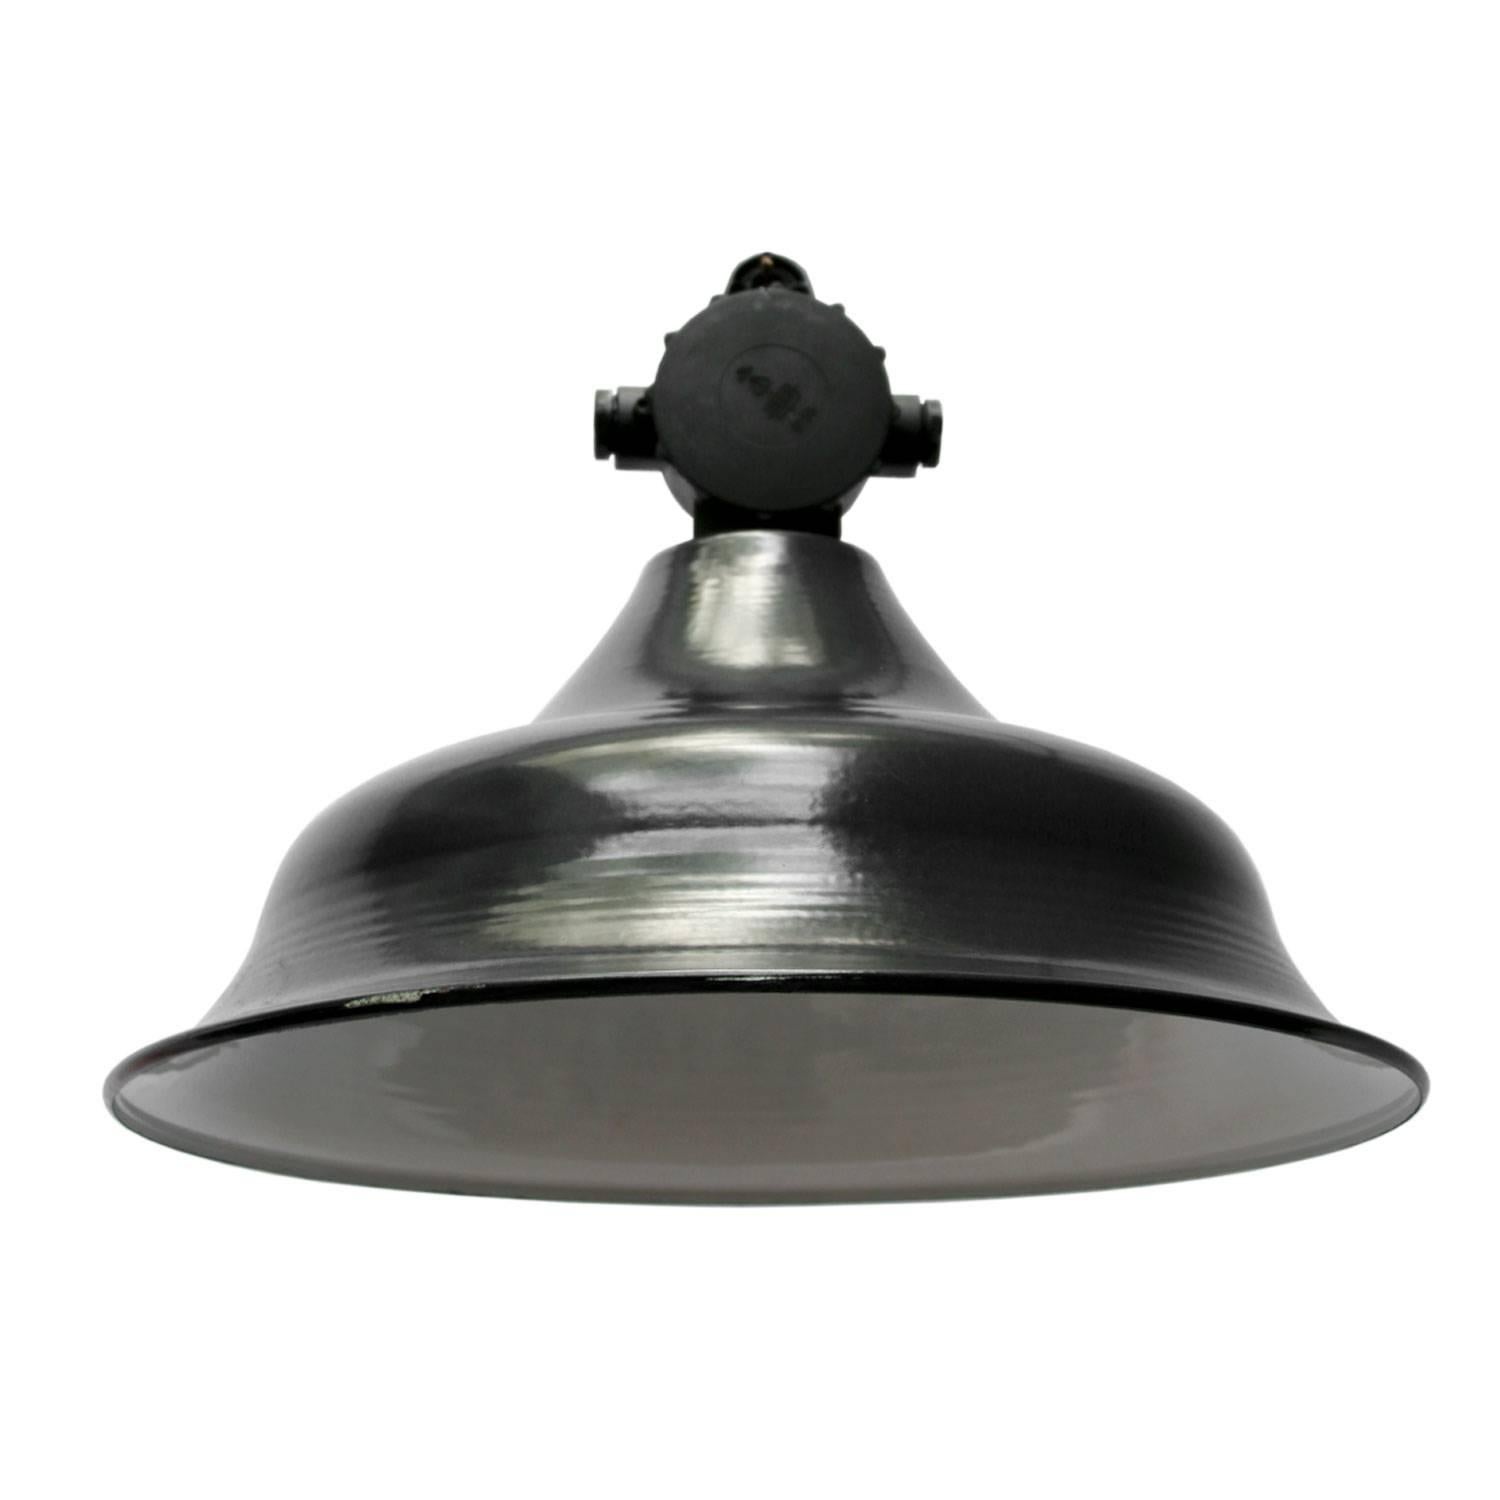 Industrial factory pendant made of dark enamel. White interior with bakelite top.

Measure: Weight 2.2 kg / 4.9 lb

All lamps have been made suitable by international standards for incandescent light bulbs, energy-efficient and LED bulbs. E26/E27